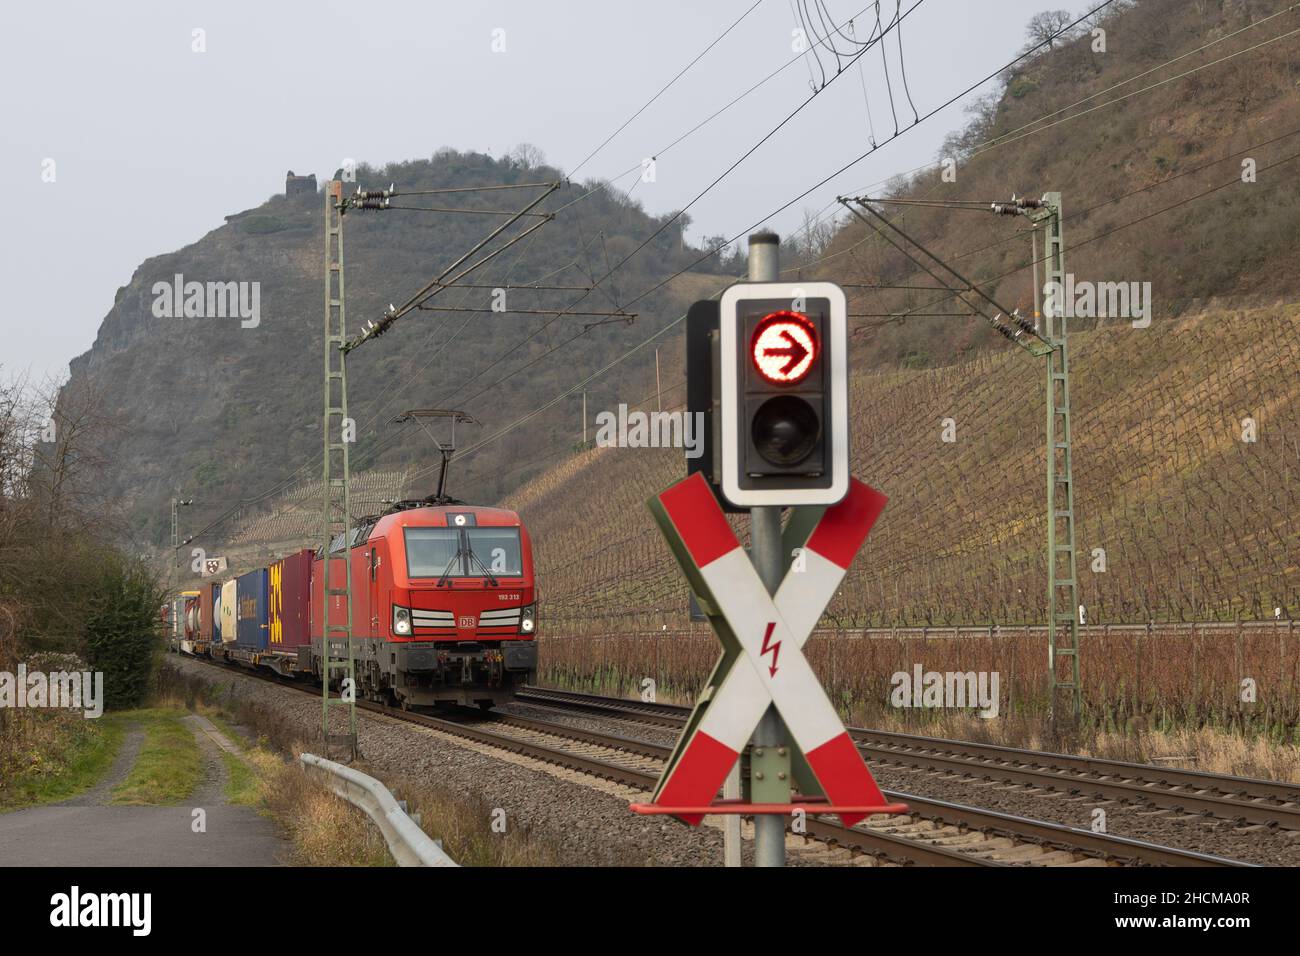 A freight train with a red electric locomotive and a railroad crossing signal with red lights in front Stock Photo